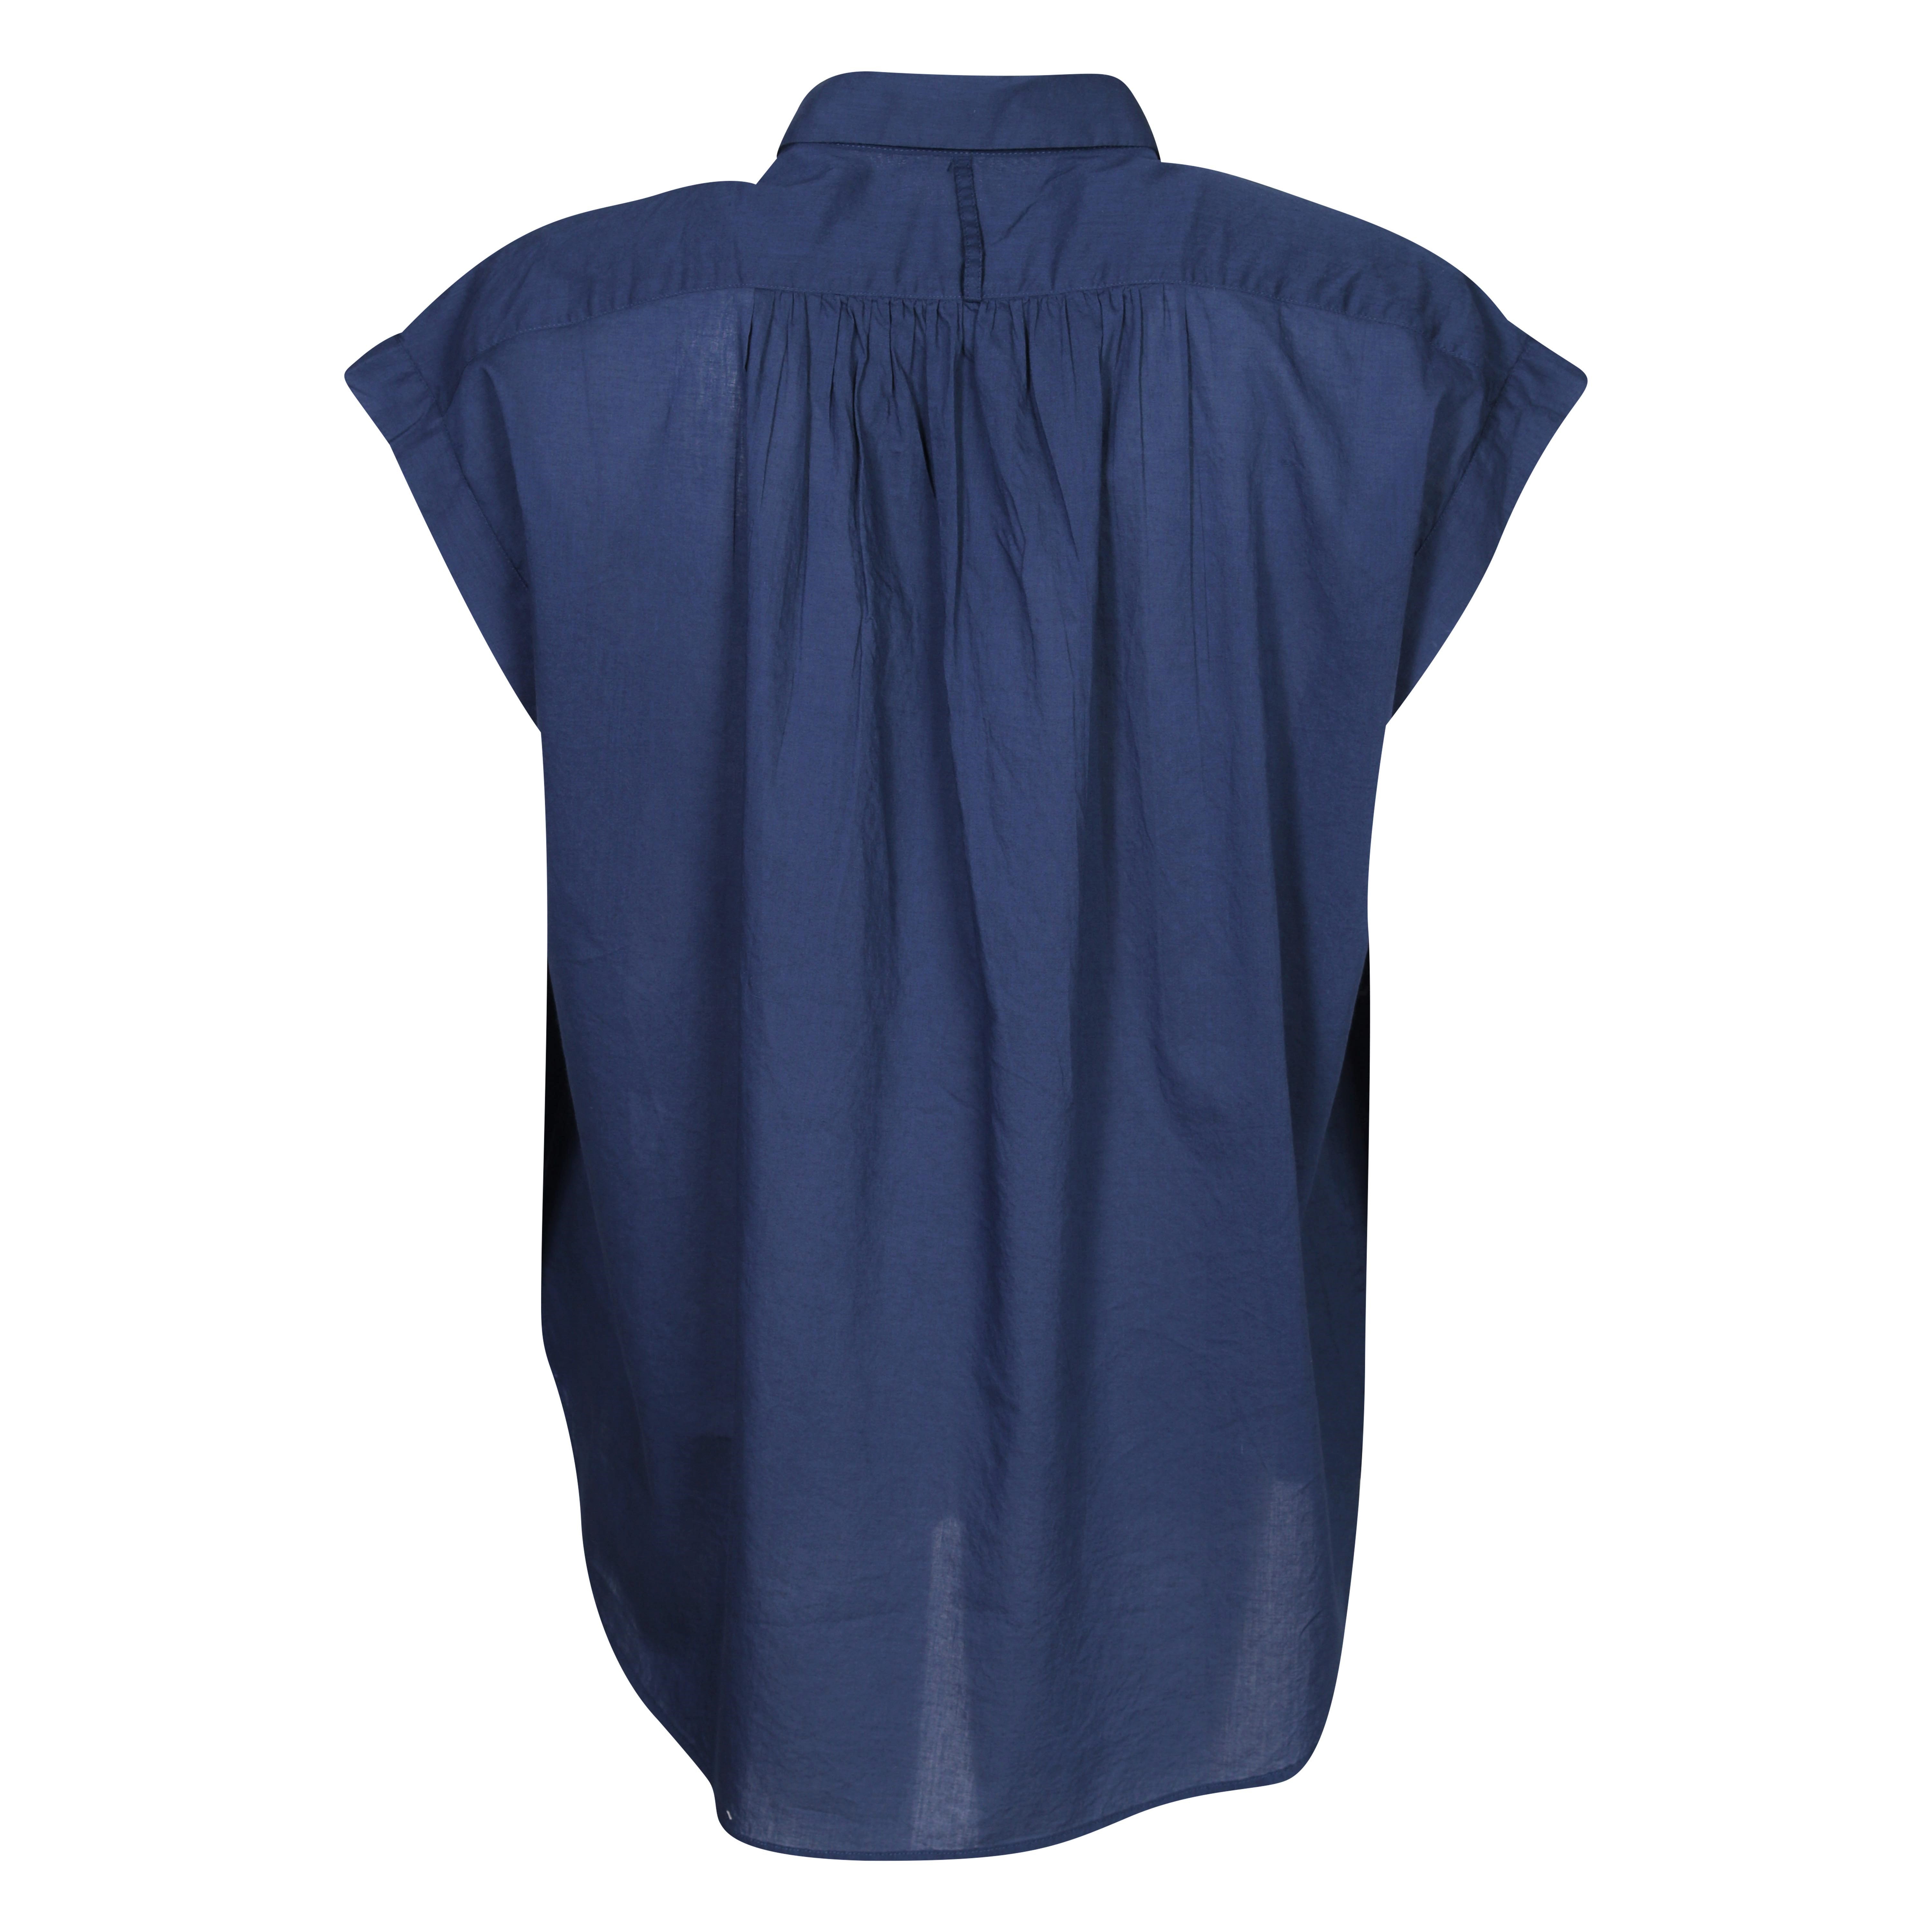 Nili Lotan Cotton Voile Blouse Normandy in Marine Blue XS